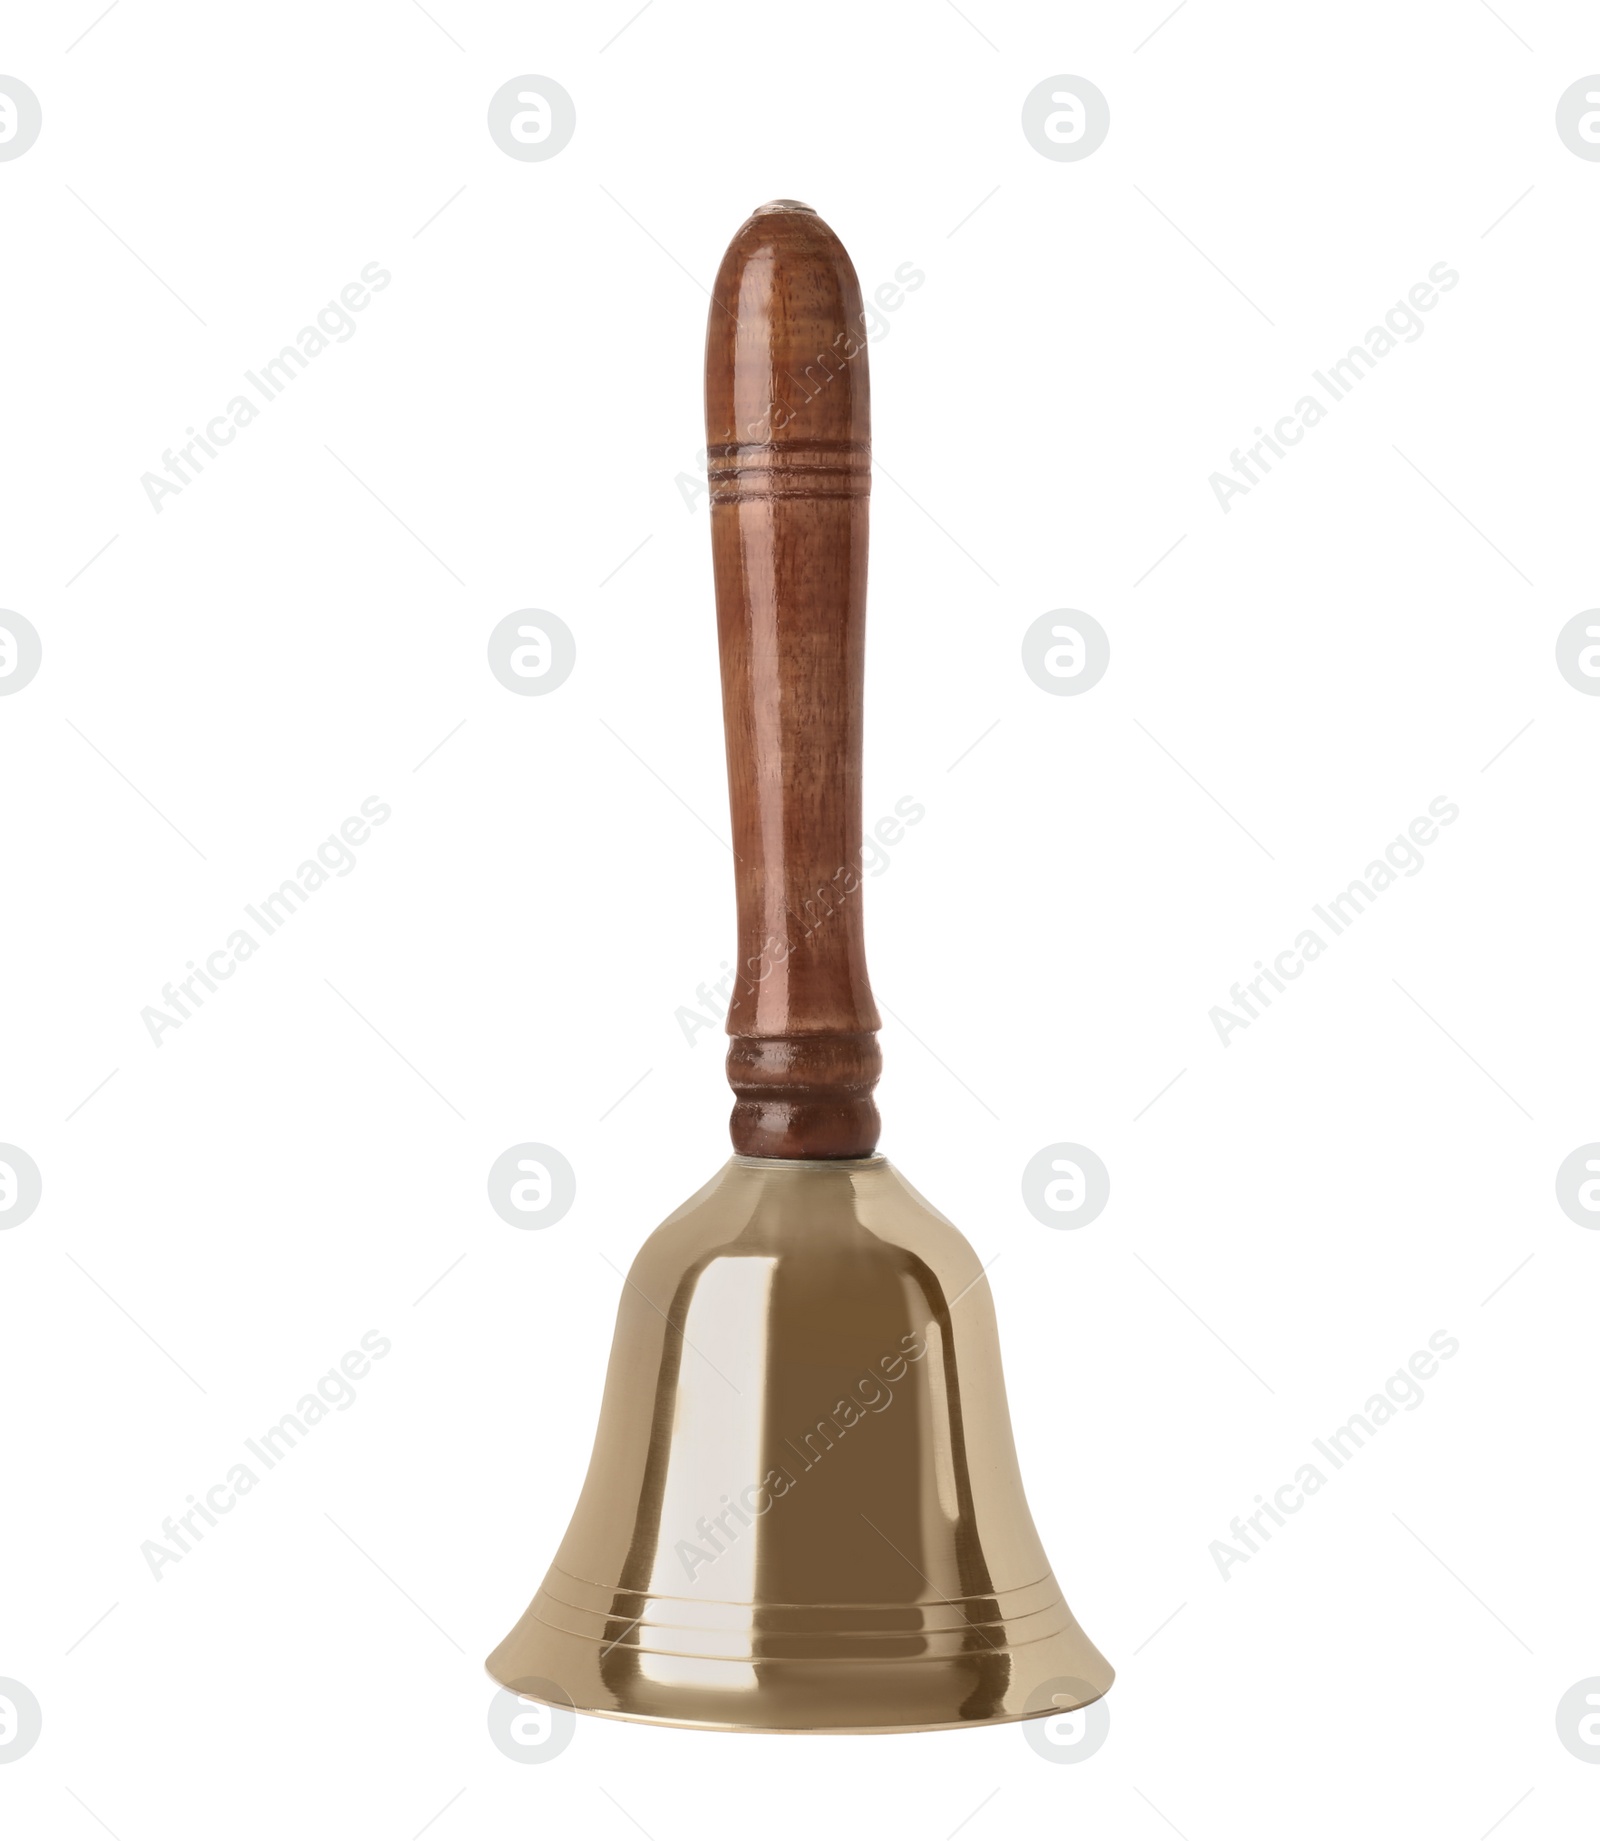 Photo of Golden school bell with wooden handle isolated on white